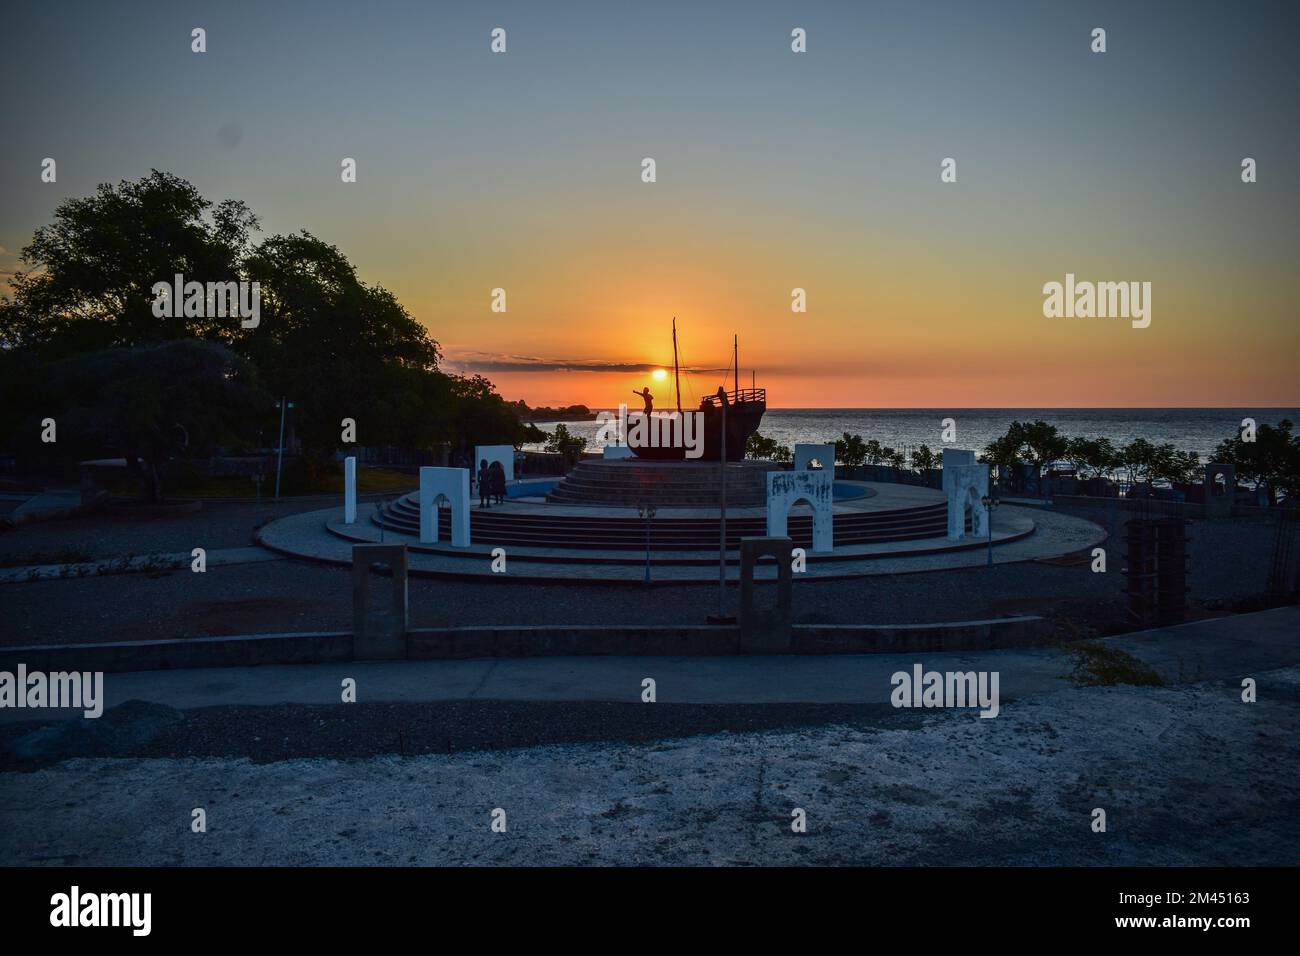 Monument Lifau, Oecusse, East Timor. The place where the Portuguese colonial landed on the island of Timor. Stock Photo